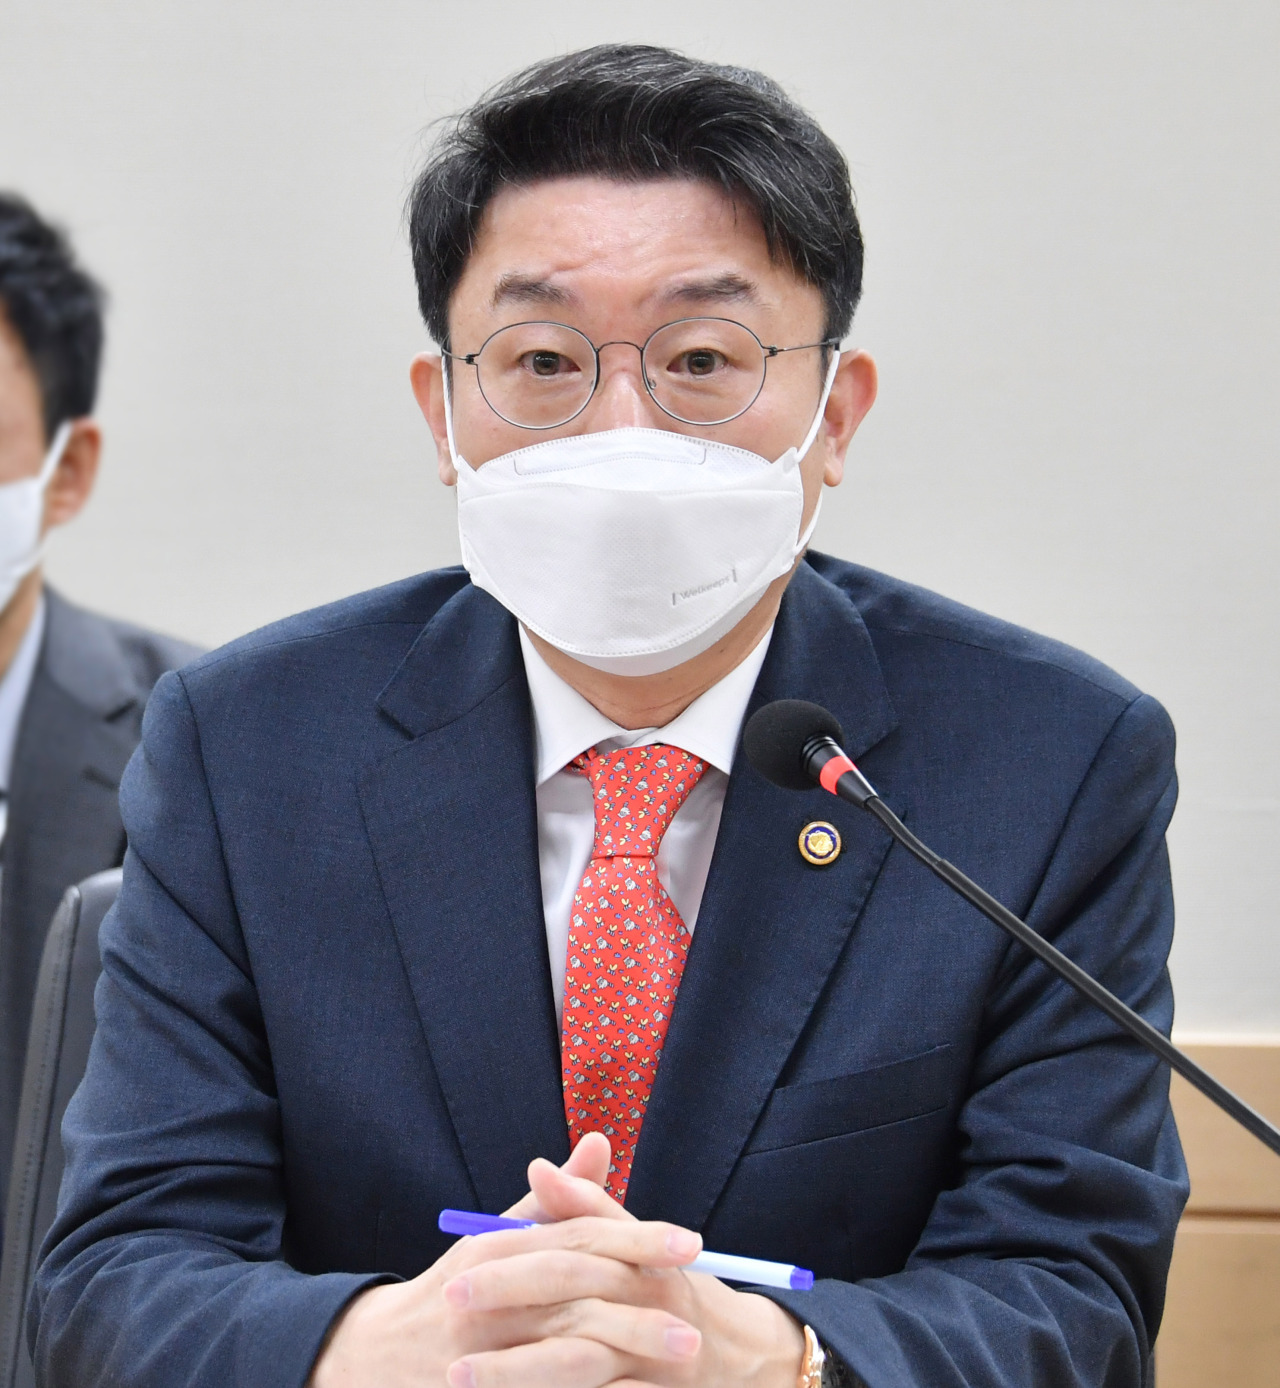 First Vice Finance Minister Lee Eog-weon speaks during a meeting to discuss innovative growth strategies and the Korean New Deal initiative aimed at stimulating economic growth and job creation through digital and green projects, at the government office complex in Seoul on Friday. (Yonhap)